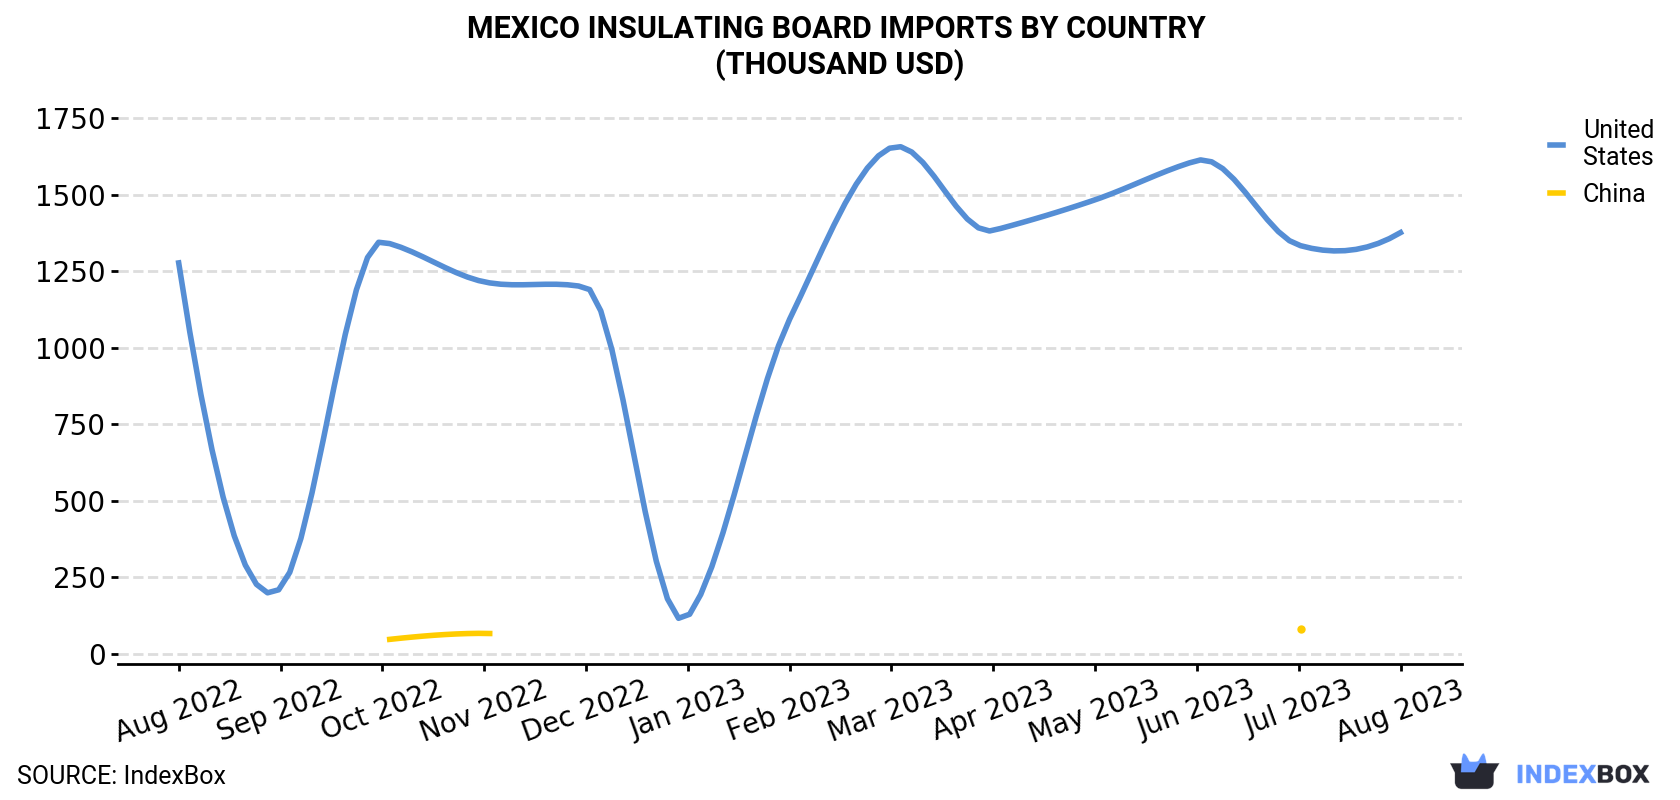 Mexico Insulating Board Imports By Country (Thousand USD)